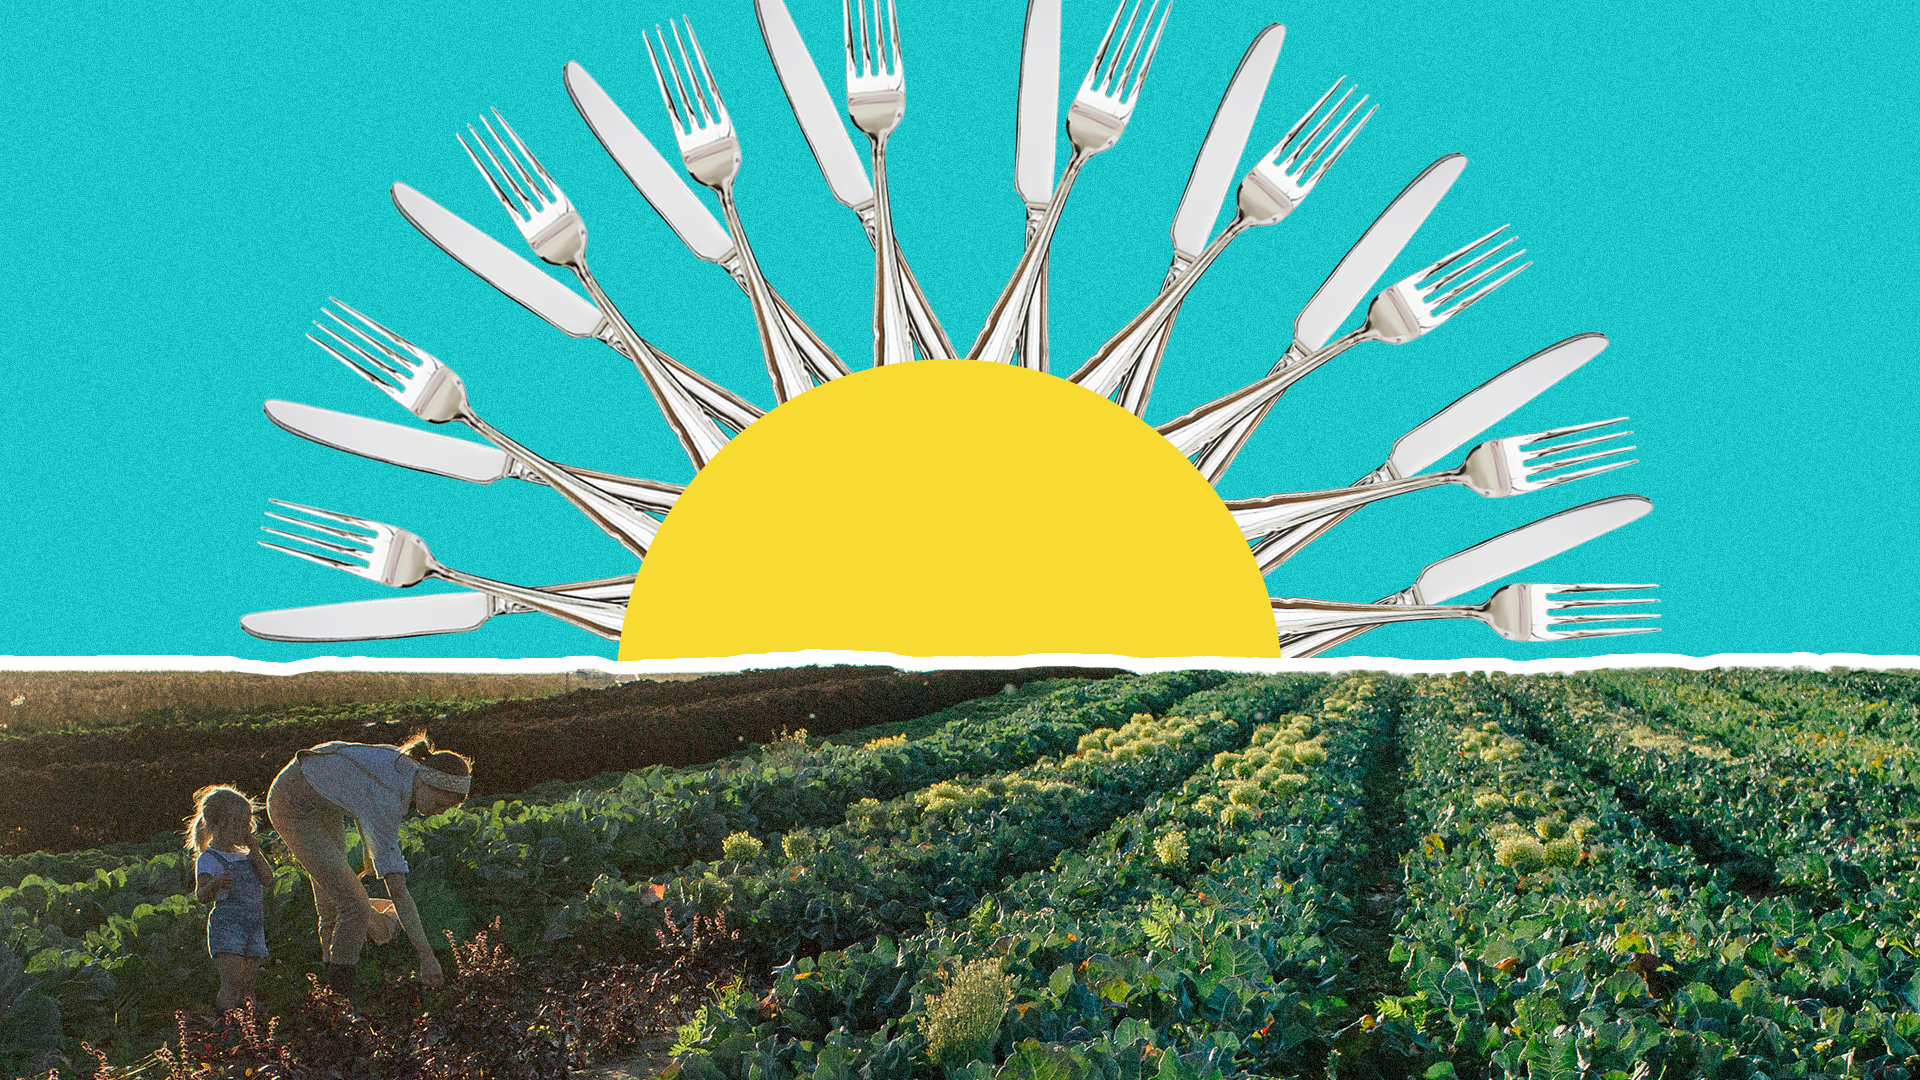 An image of the sun with forks and knives as sun rays. Two people are farming in the foreground.